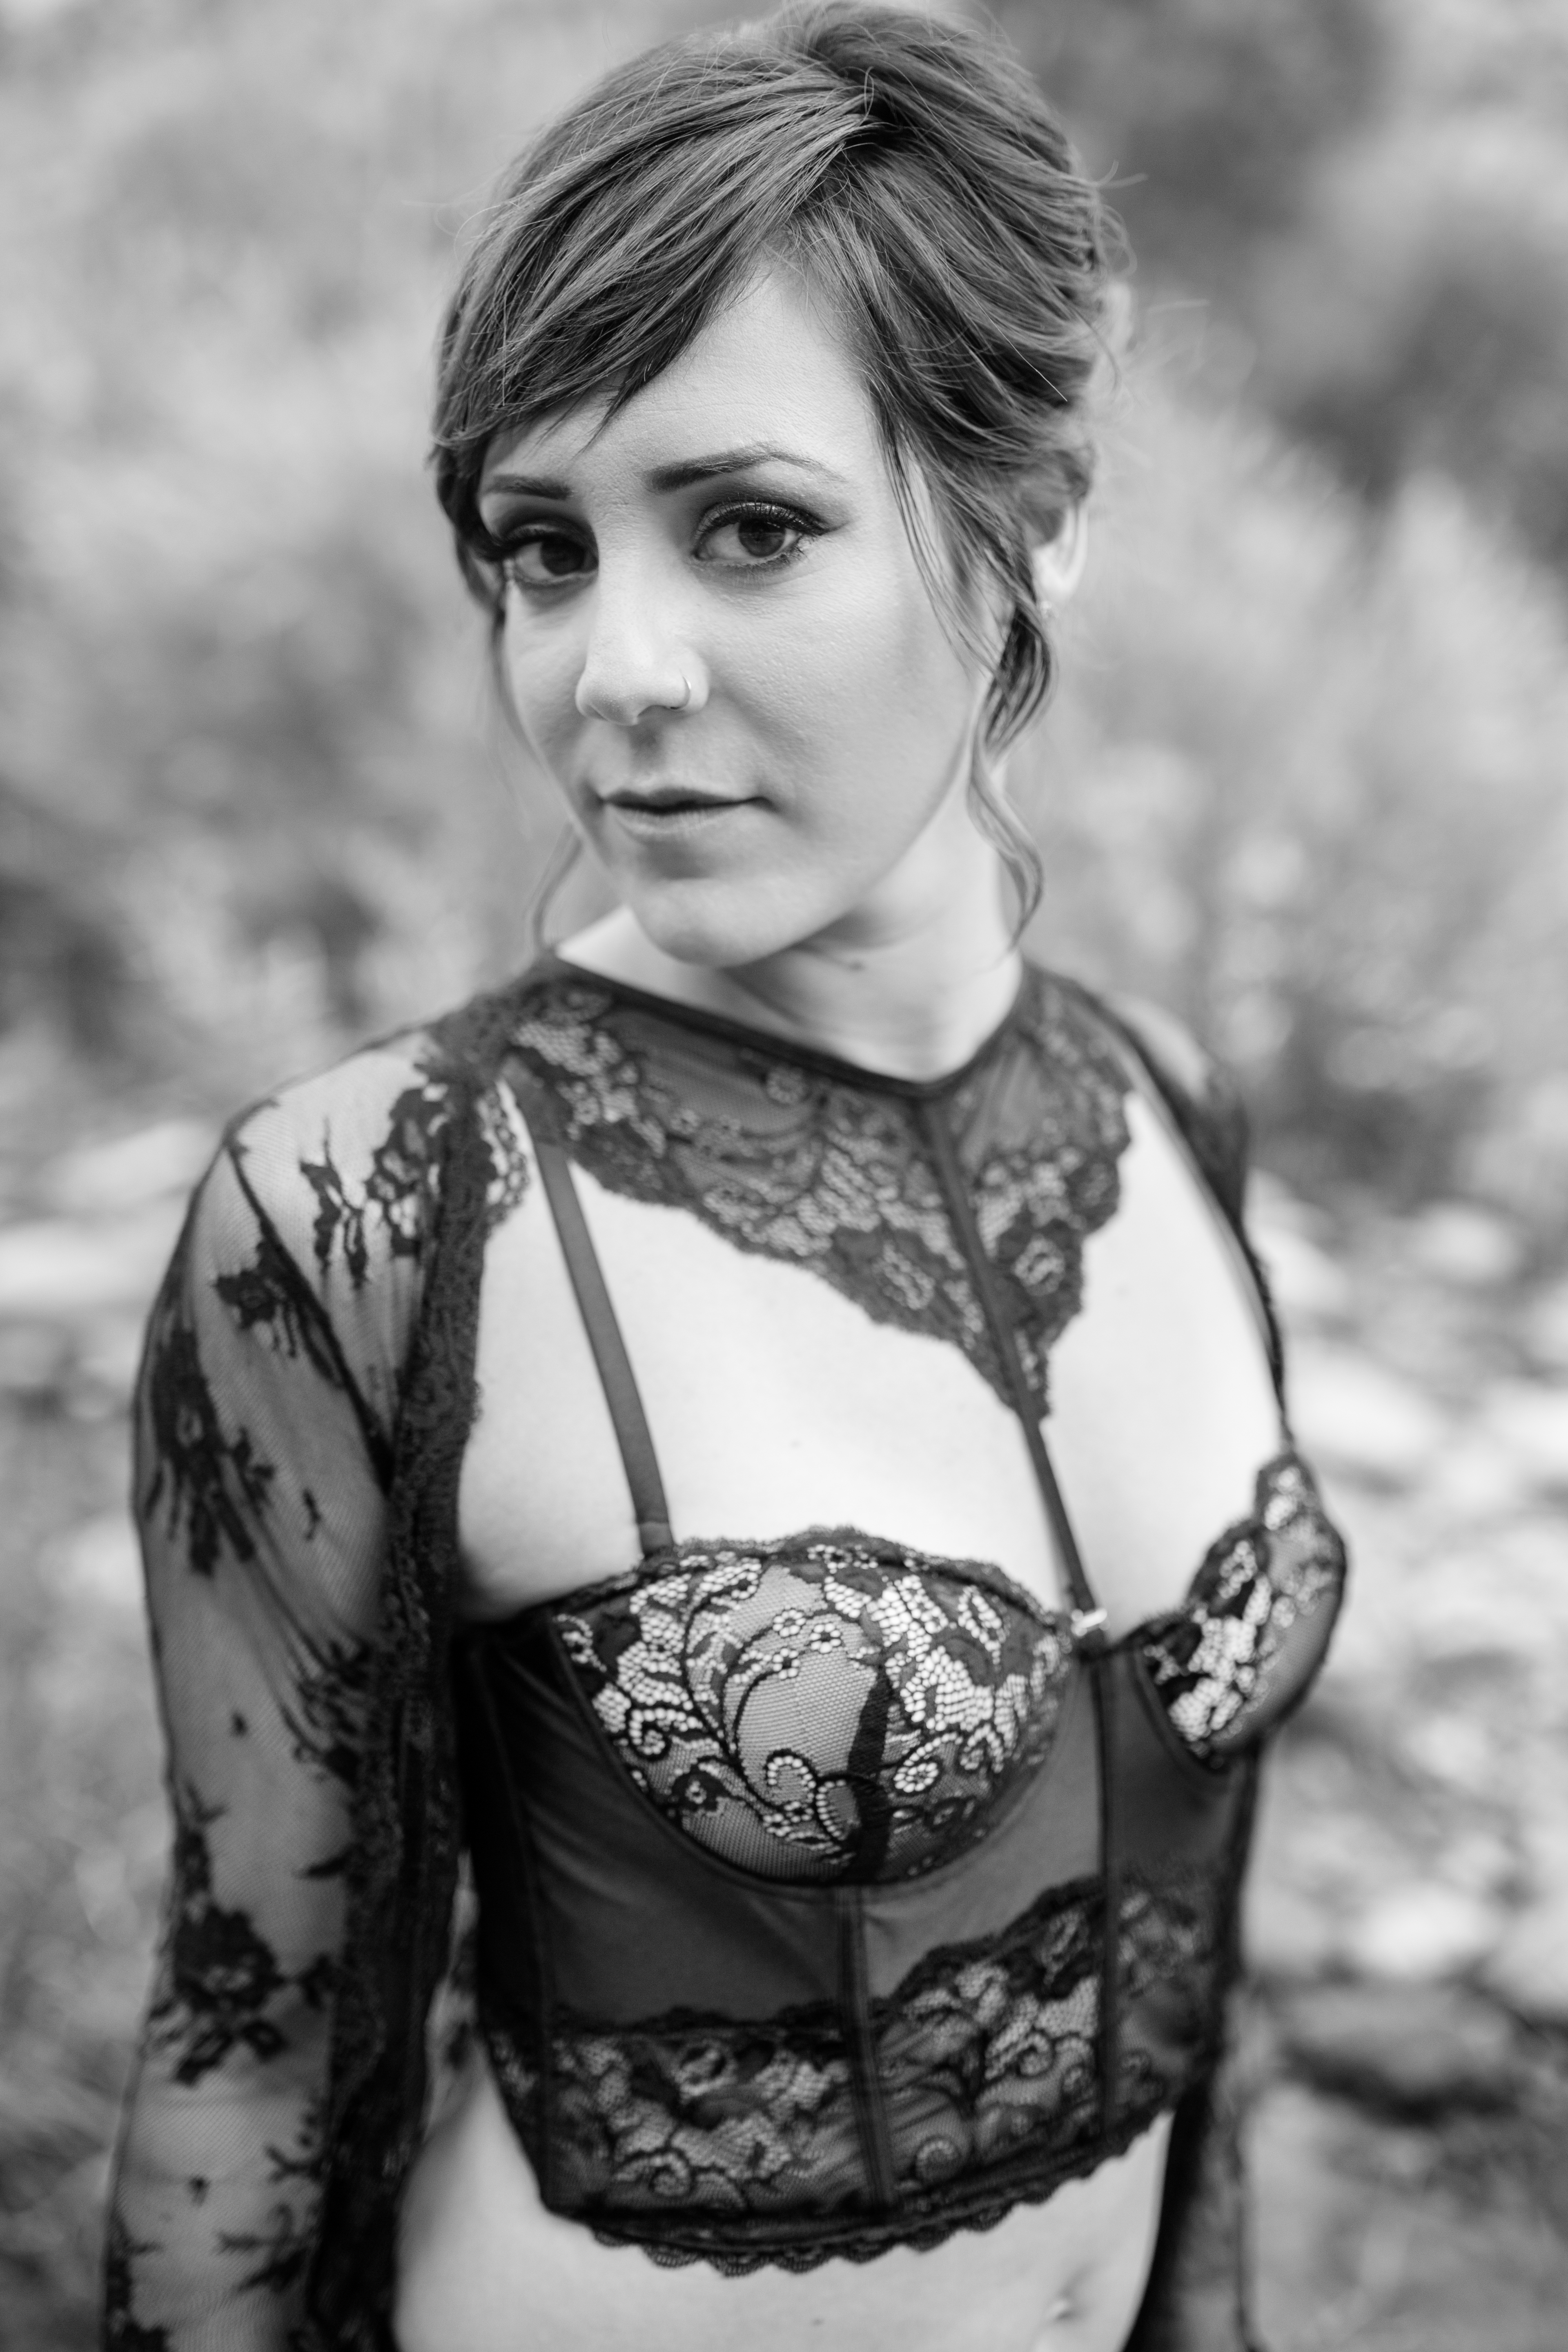 https://lilacandfernphotography.com/wp-content/uploads/2017/08/Boudoir-Fort-Collins-Colorado-Lilac-and-Fern-AM2-5.jpg